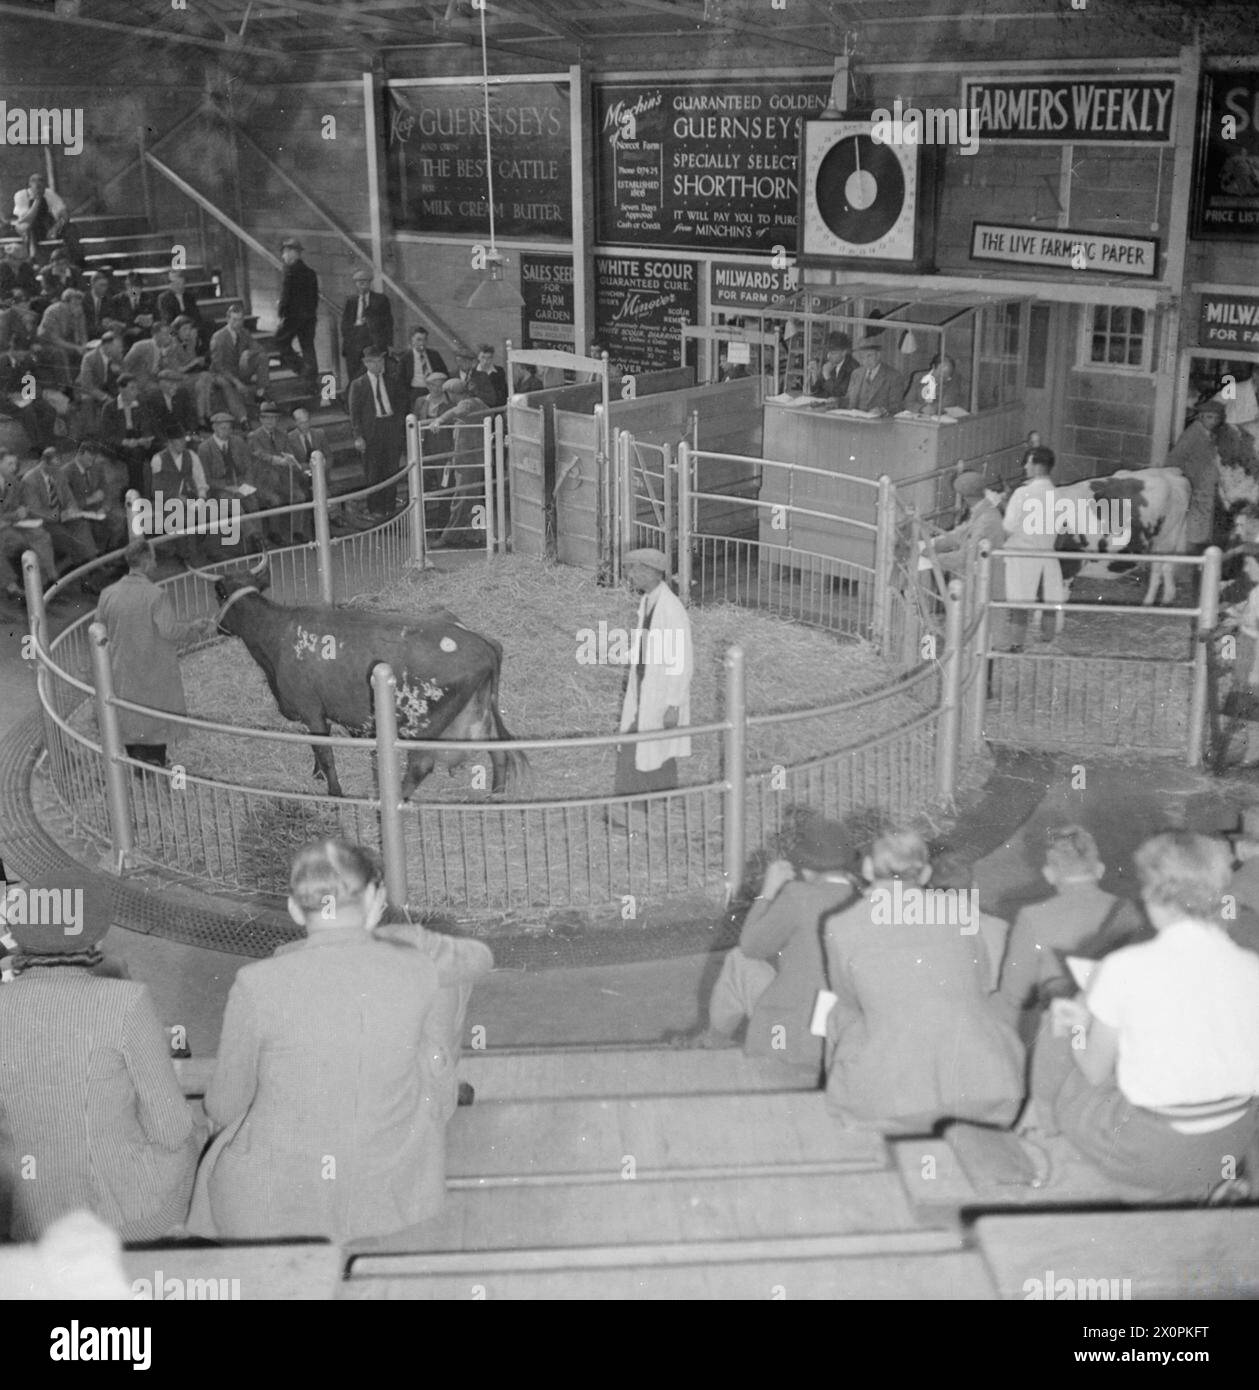 A PICTURE OF A SOUTHERN TOWN: LIFE IN WARTIME READING, BERKSHIRE, ENGLAND, UK, 1945 - A view of the sale ring at the cattle market in Reading, during a sale of Pedigree Ayrshire cattle. A cow is led around the ring, as auctioneers (visible in the box in the background under the sign board) and farmers (seated on wooden tiered seating around the edge of the ring) look on Stock Photo